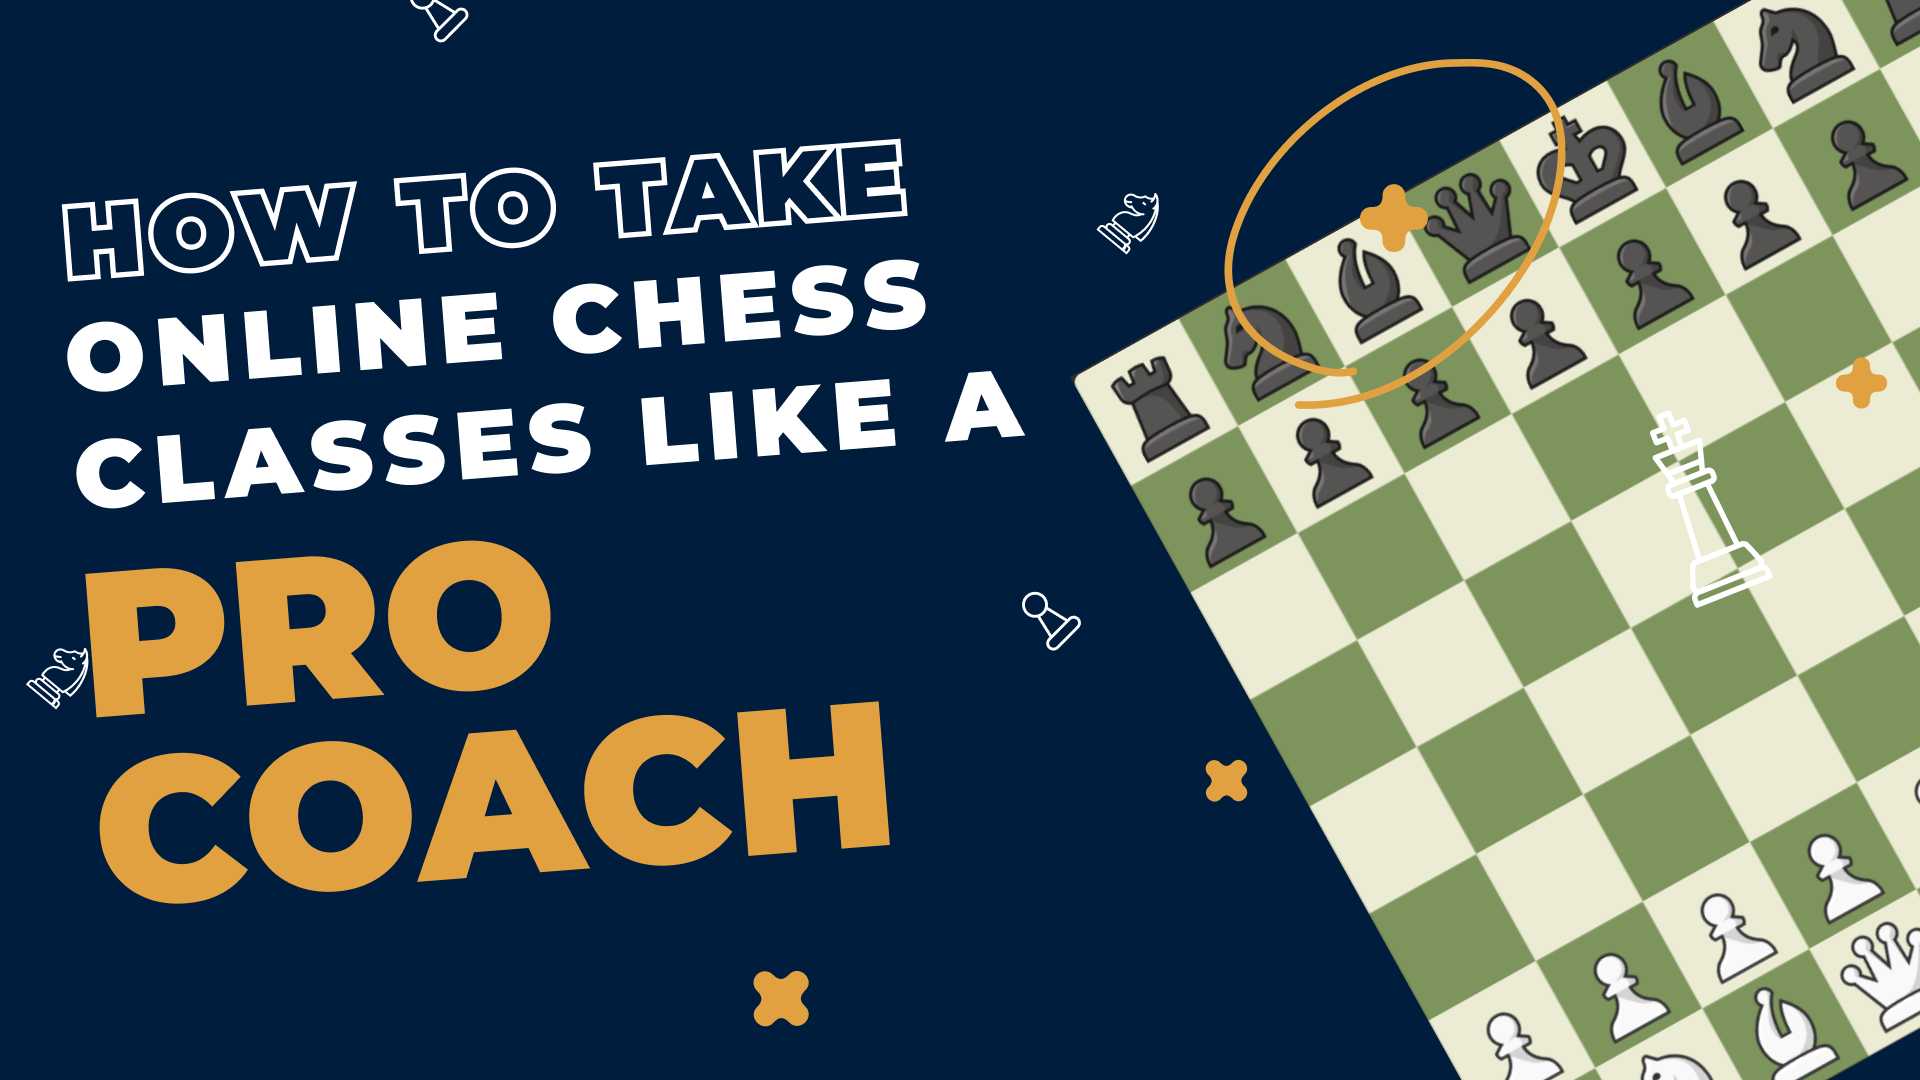 How to Take Online Chess Classes Like a Pro Coach